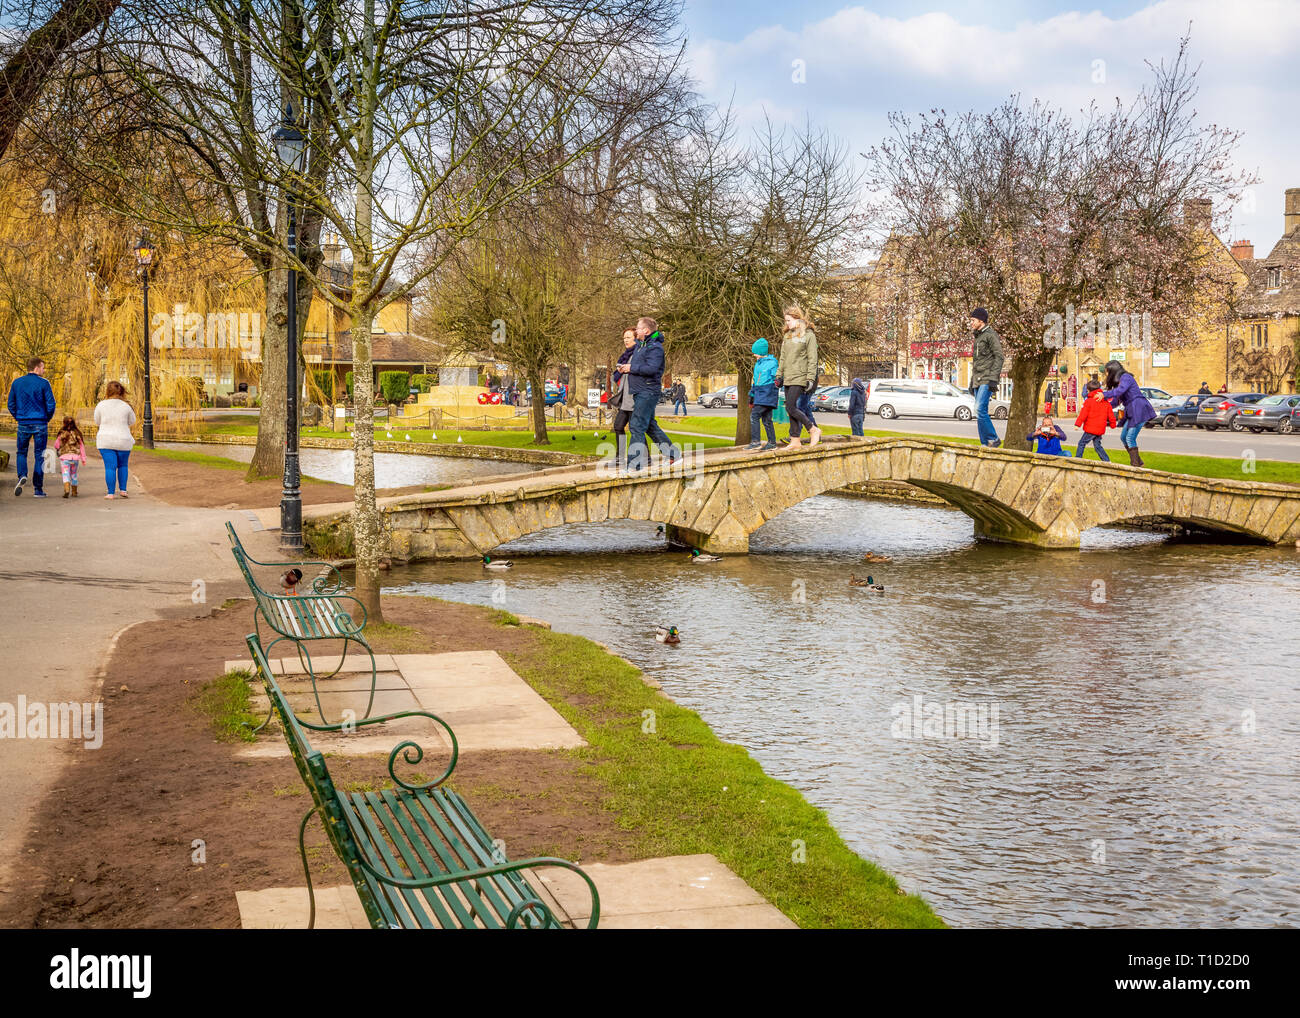 Picturesque cotswold streets of Bourton On The Water, Gloucestershire, UK Stock Photo